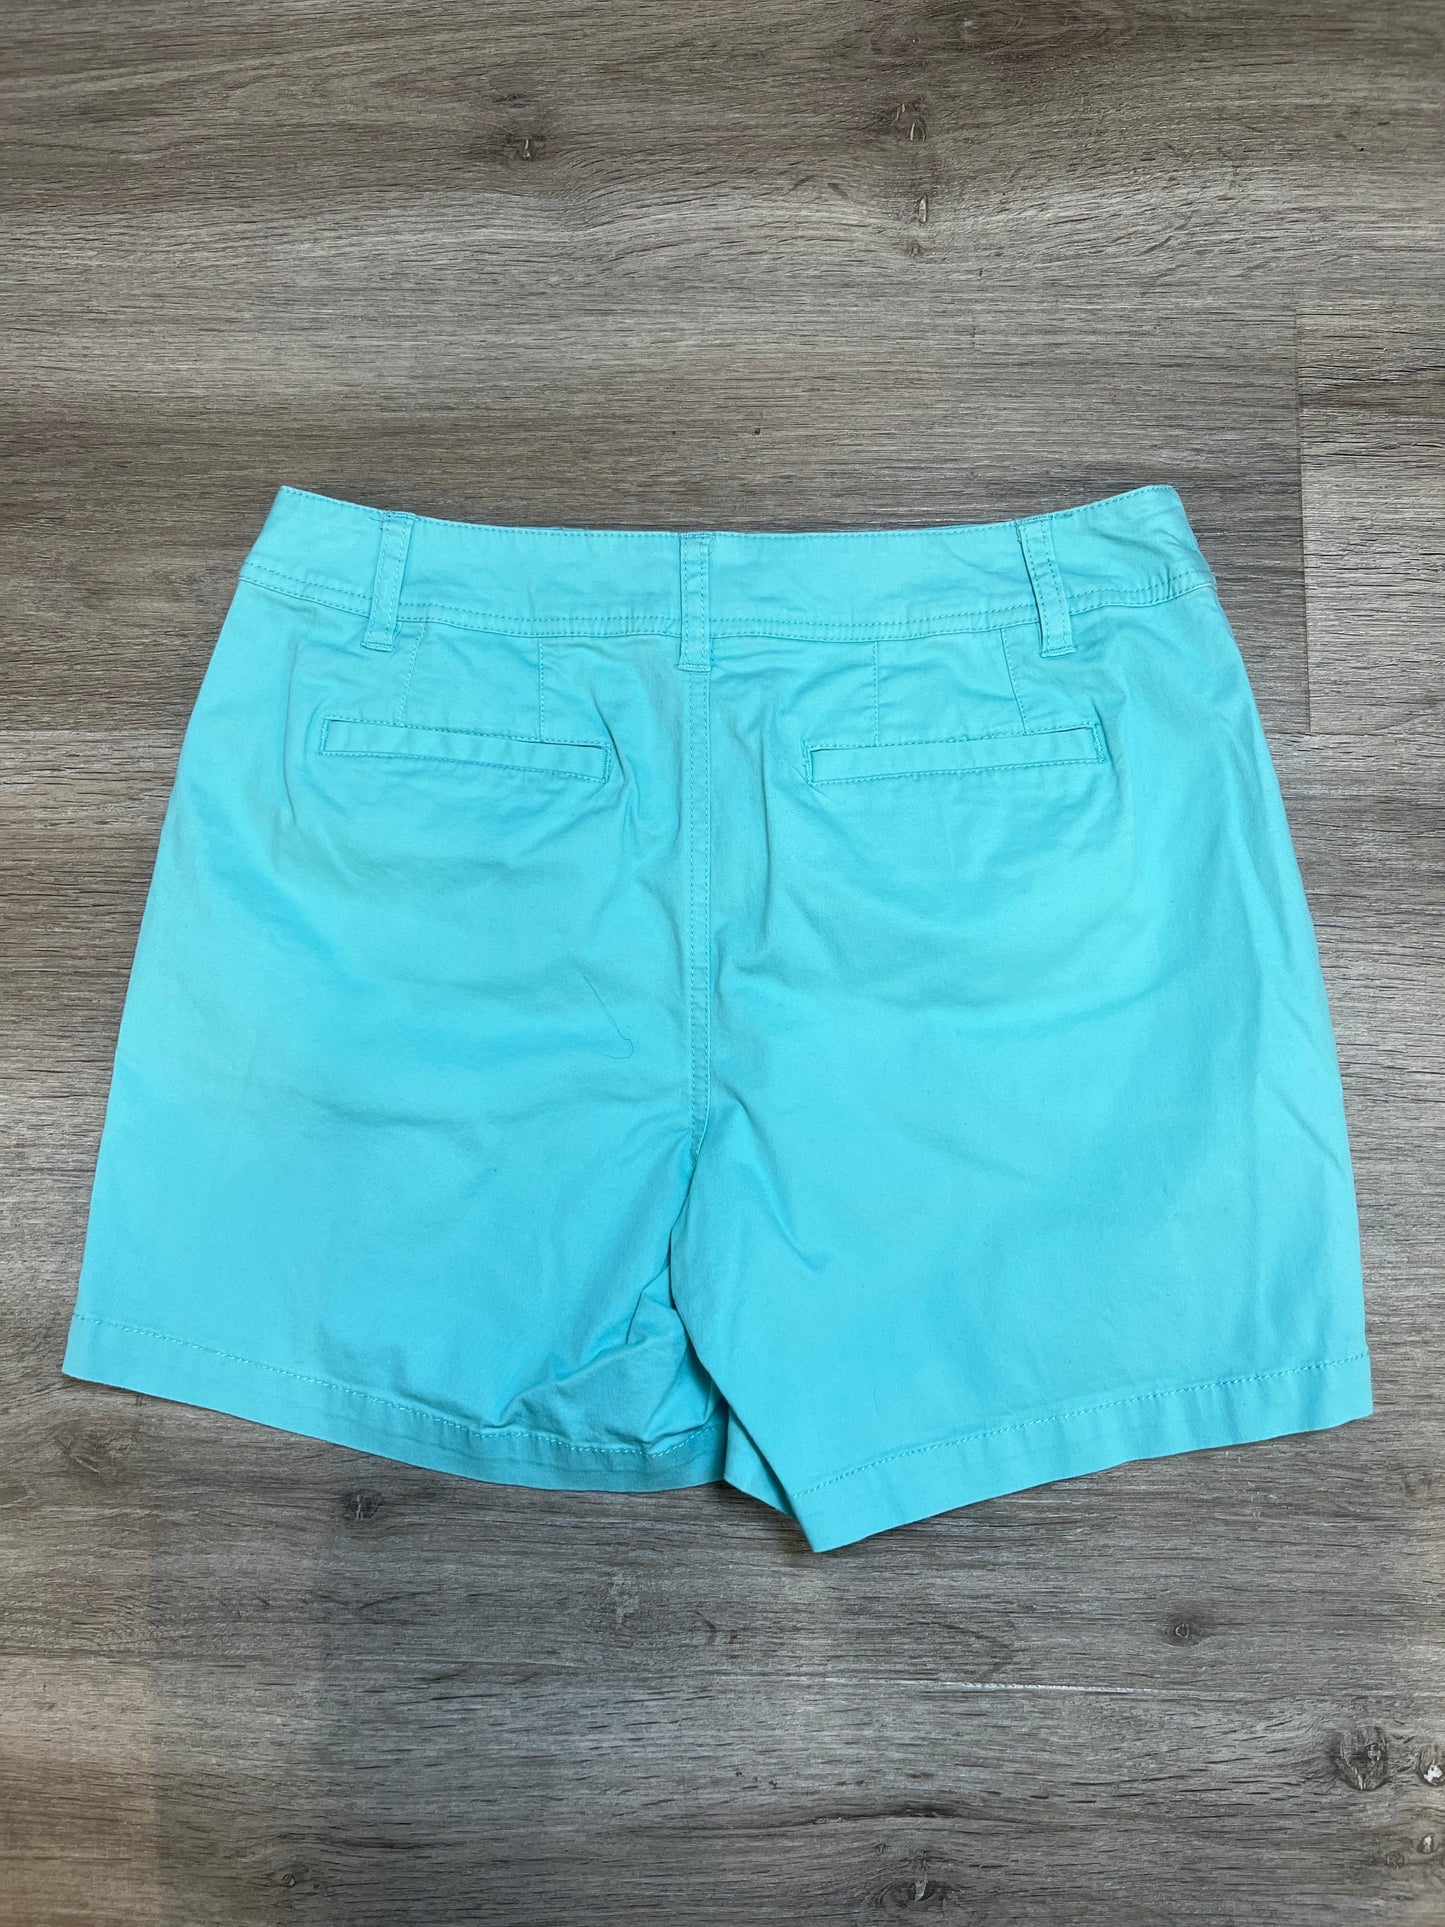 Shorts By Tribal  Size: S